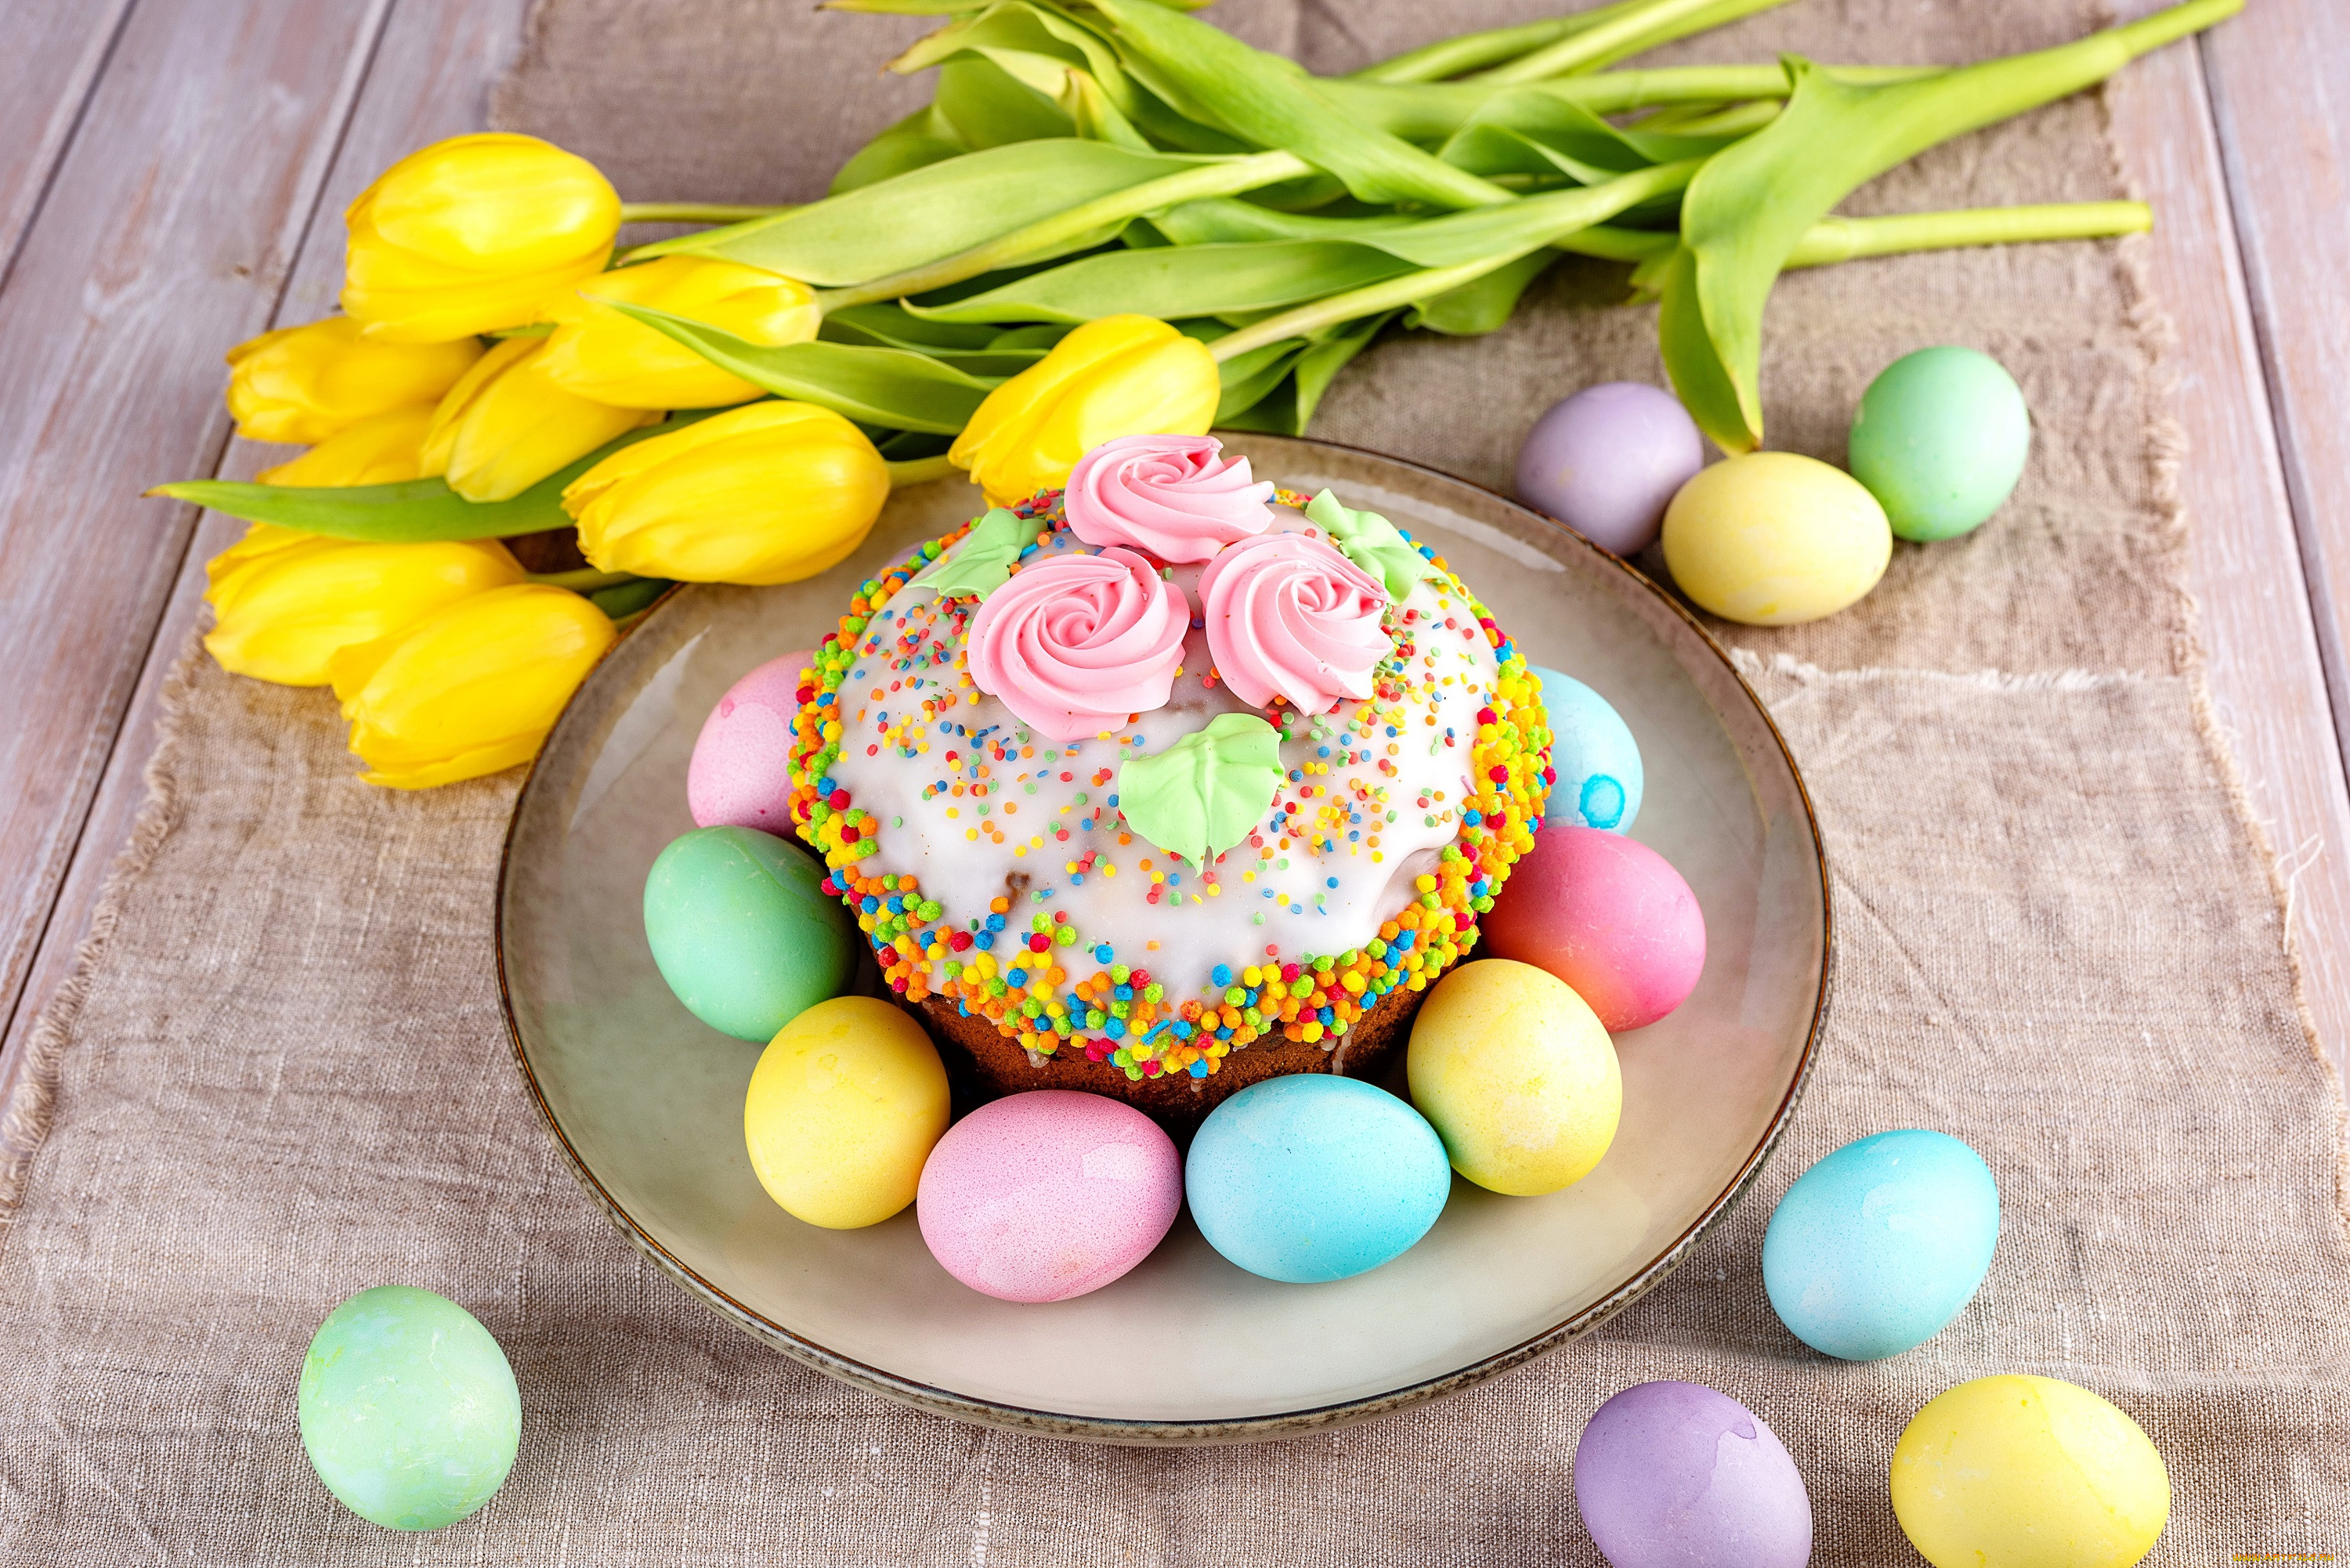 , , , , , colorful, , happy, cake, yellow, , flowers, tulips, spring, easter, eggs, decoration